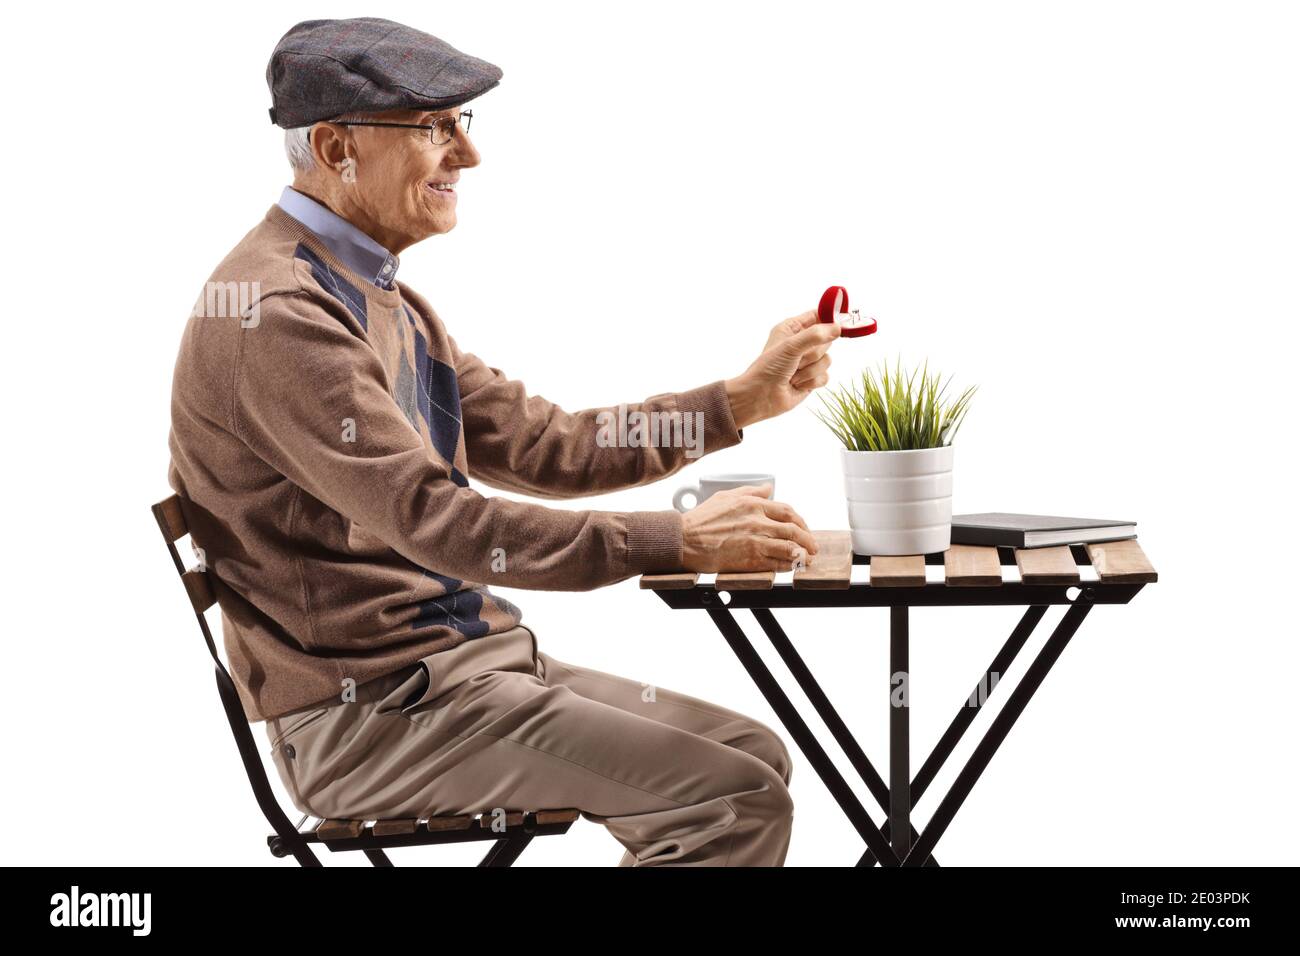 Elderly man sitting at a cafe and holding a ring in a box isolated on white background Stock Photo